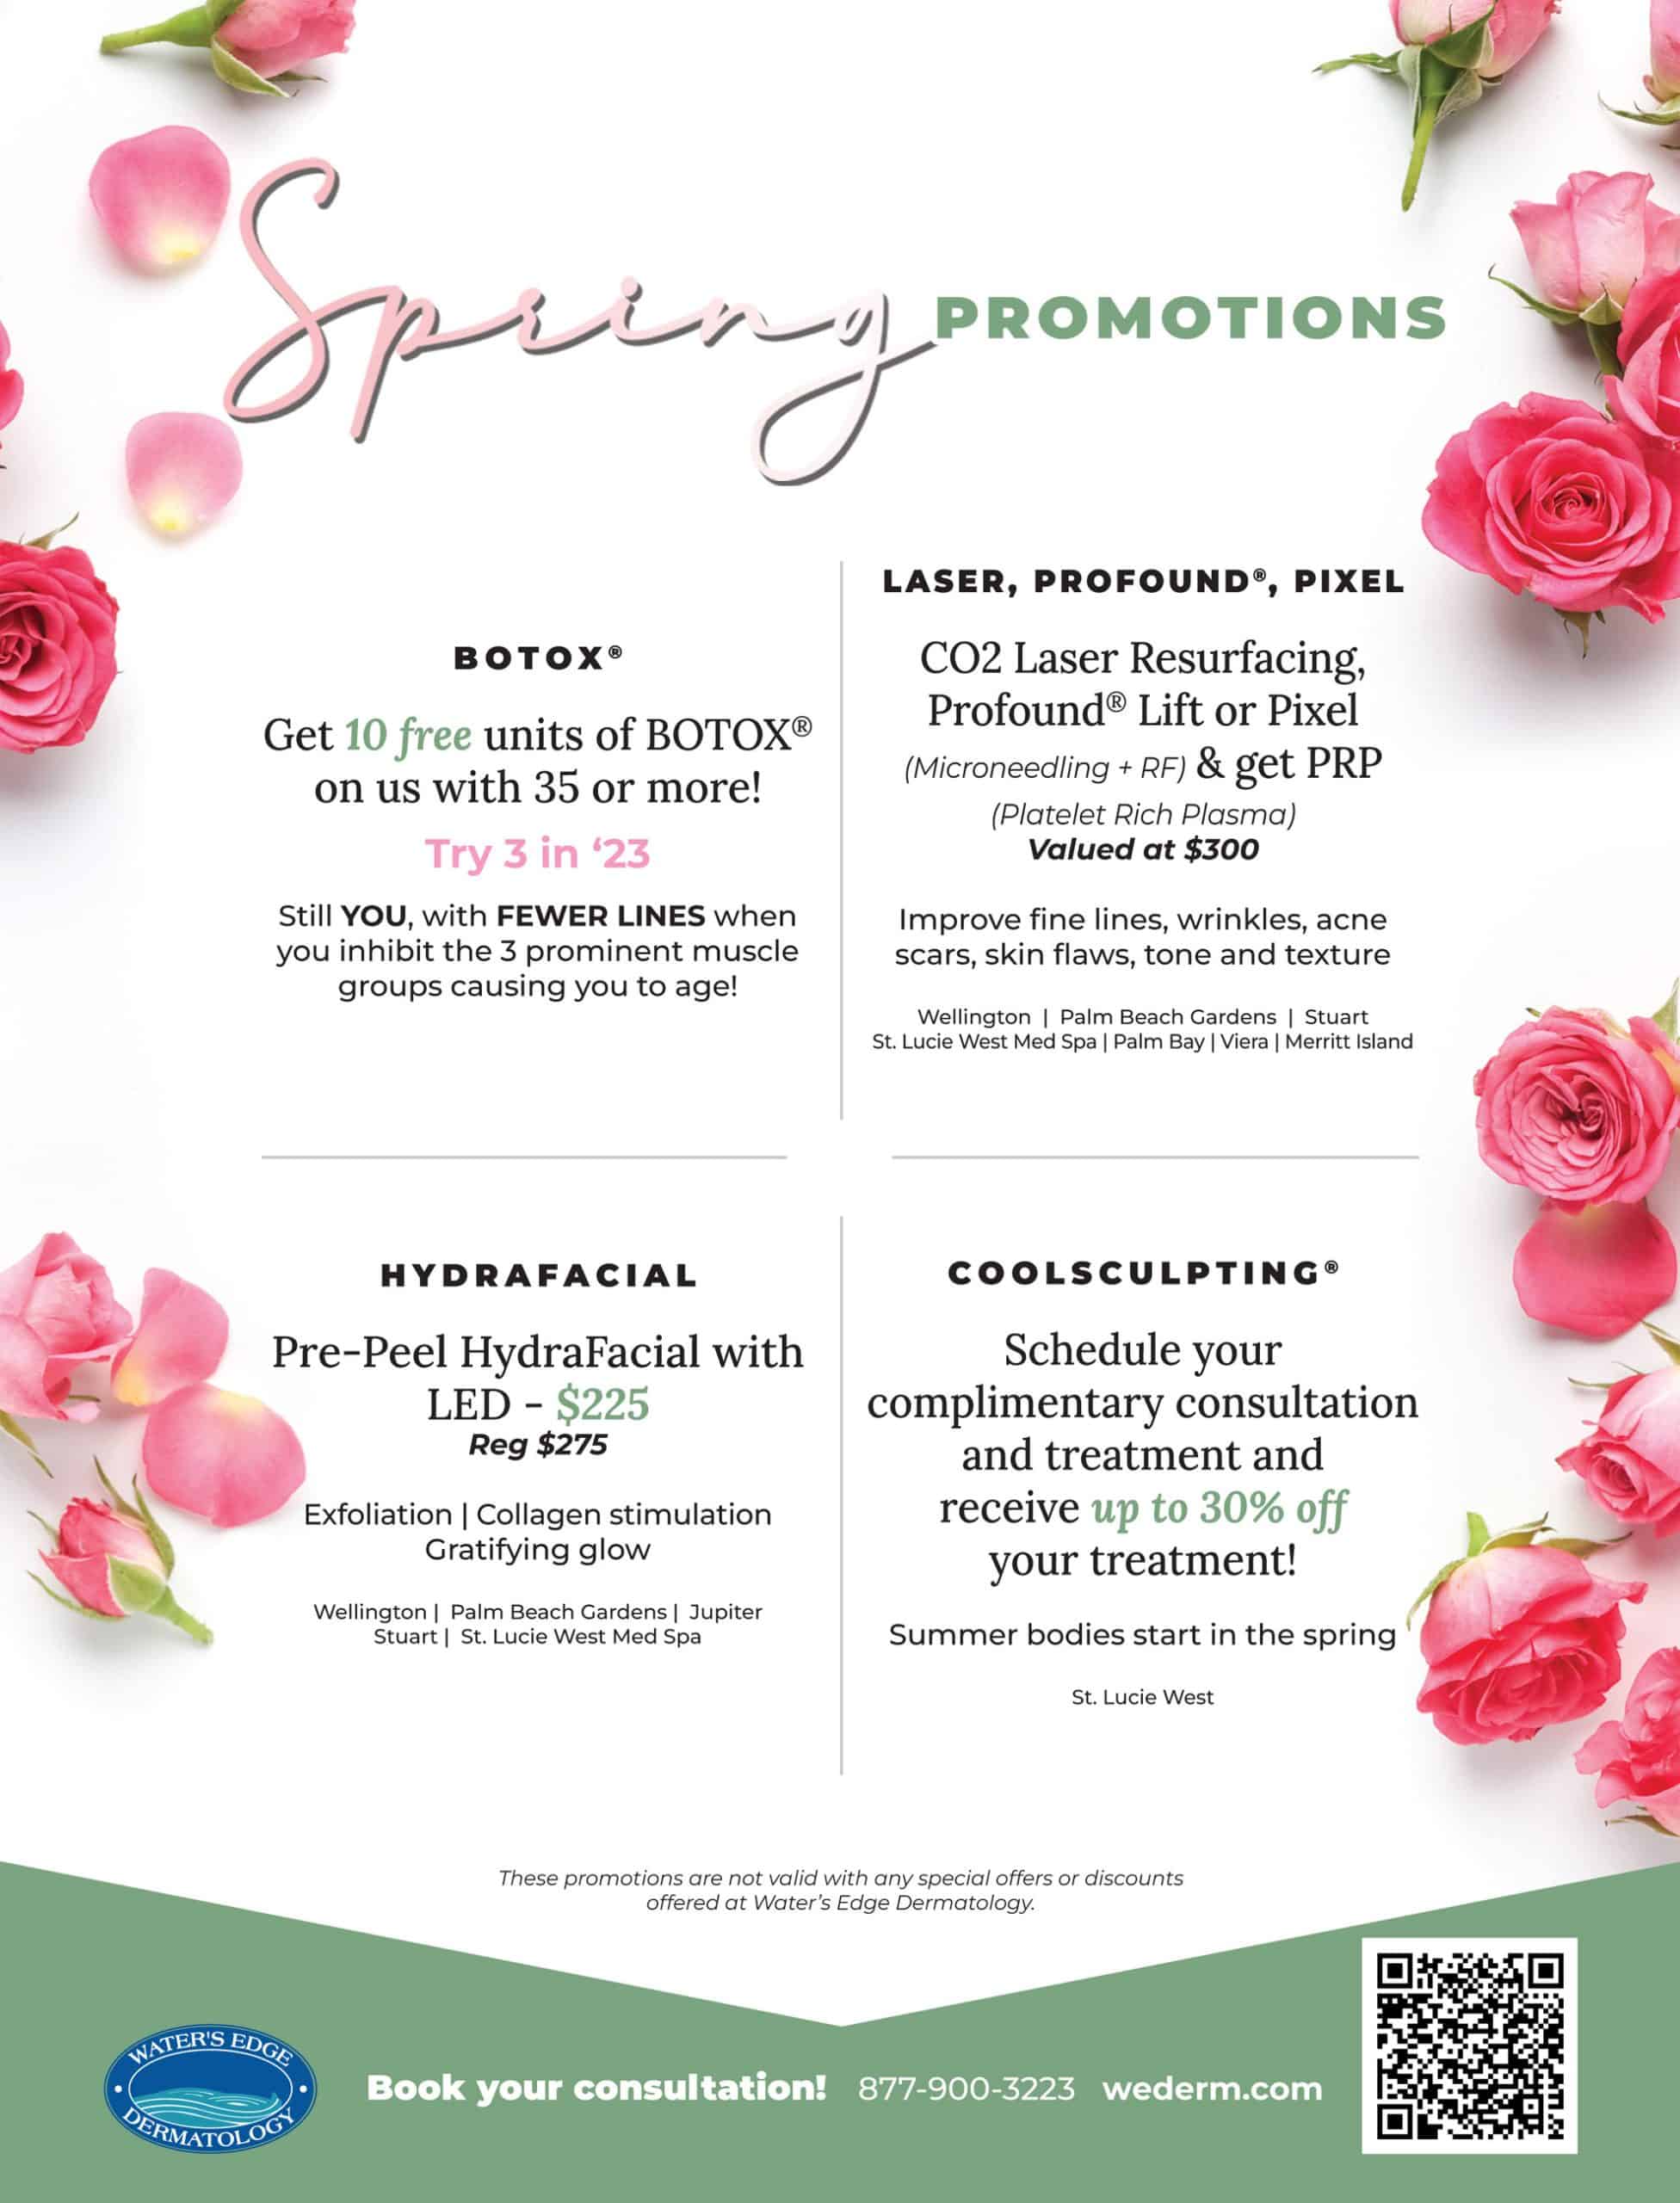 Monthly Promotions at Water's Edge Dermatology